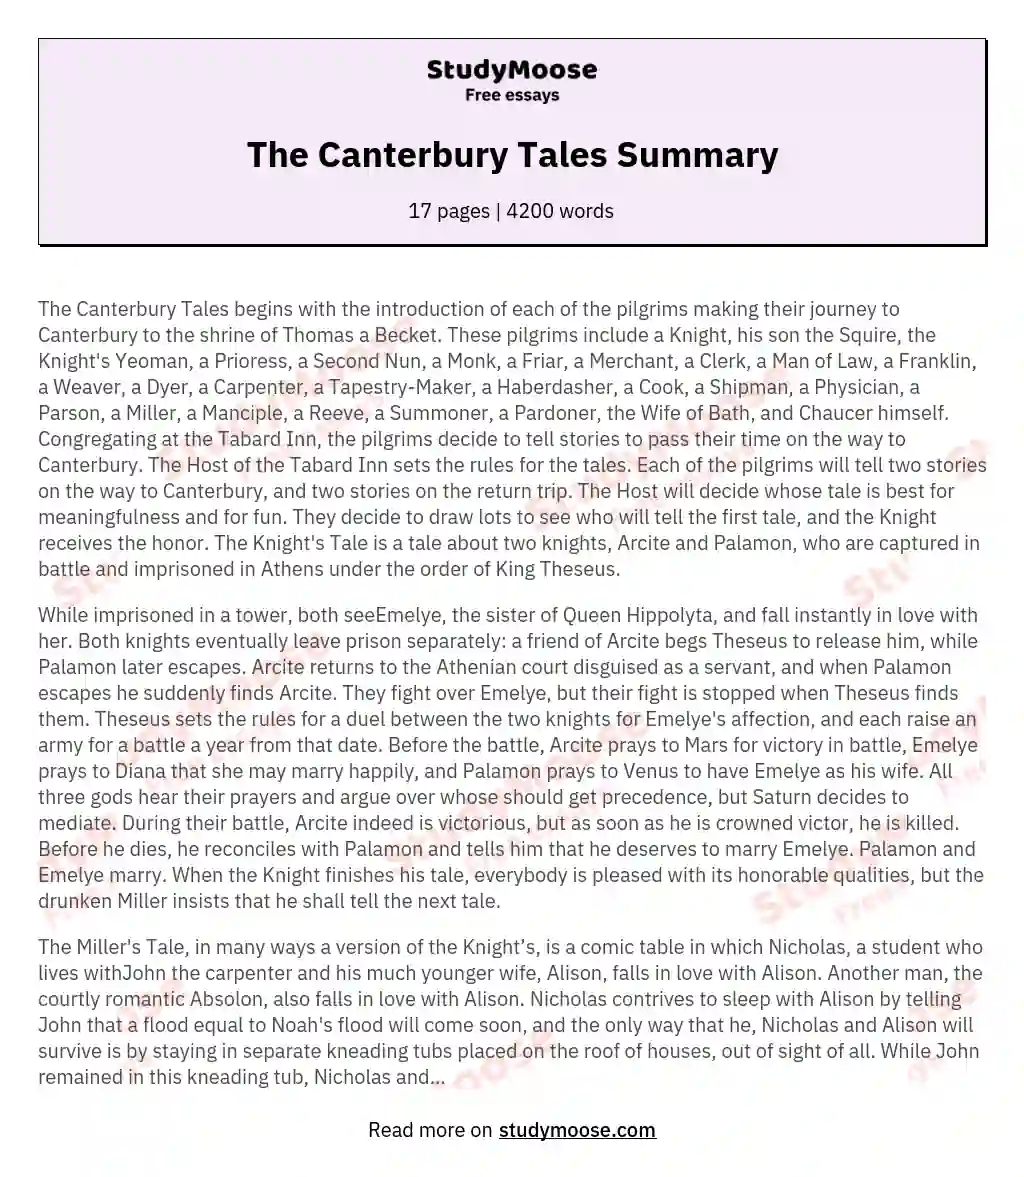 essay on the canterbury tales